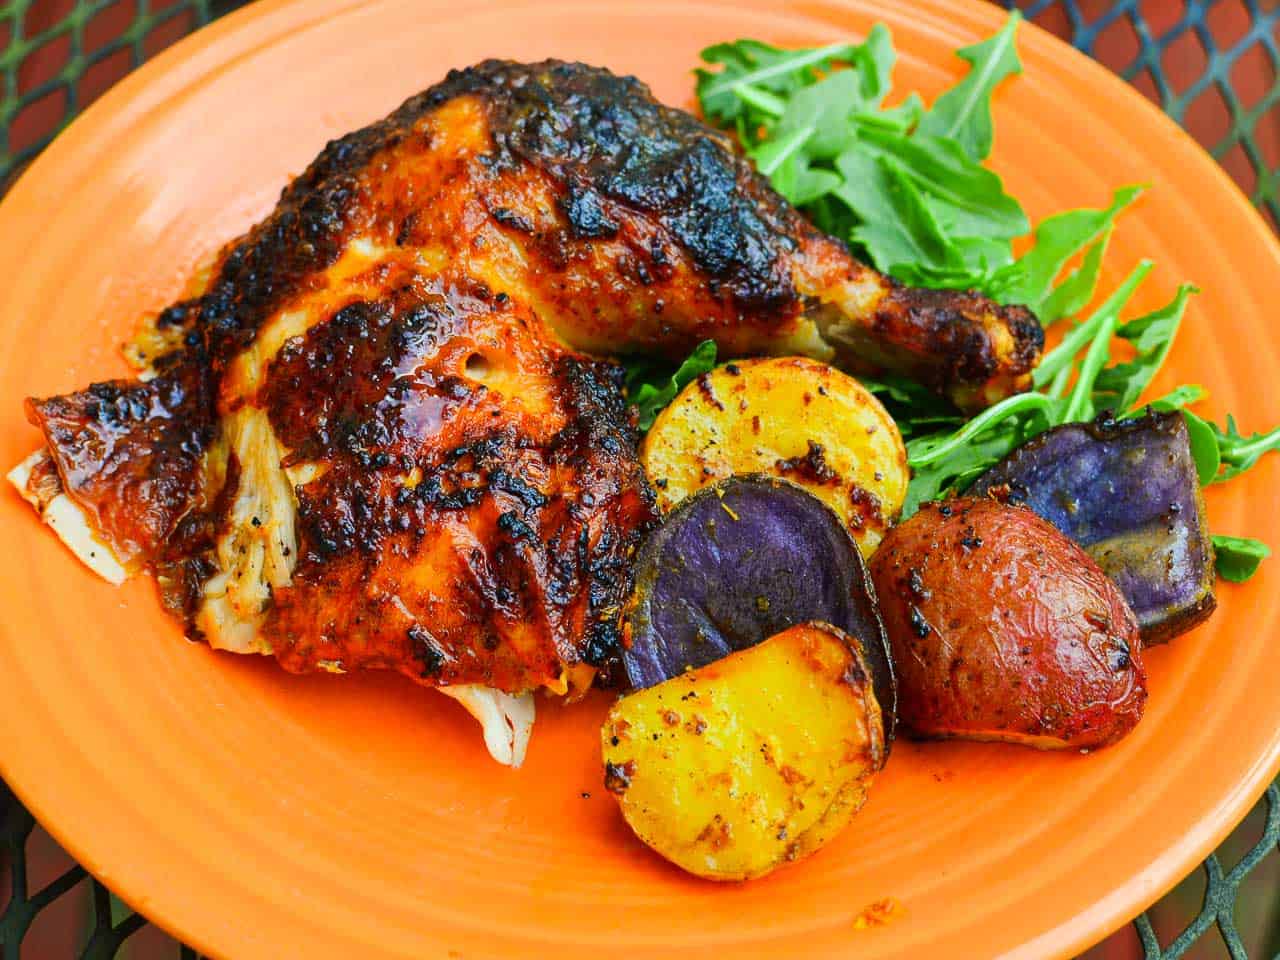 A plate with a cooked leg of Pollo a la Brasa, with purple, red, and yellow potatoes